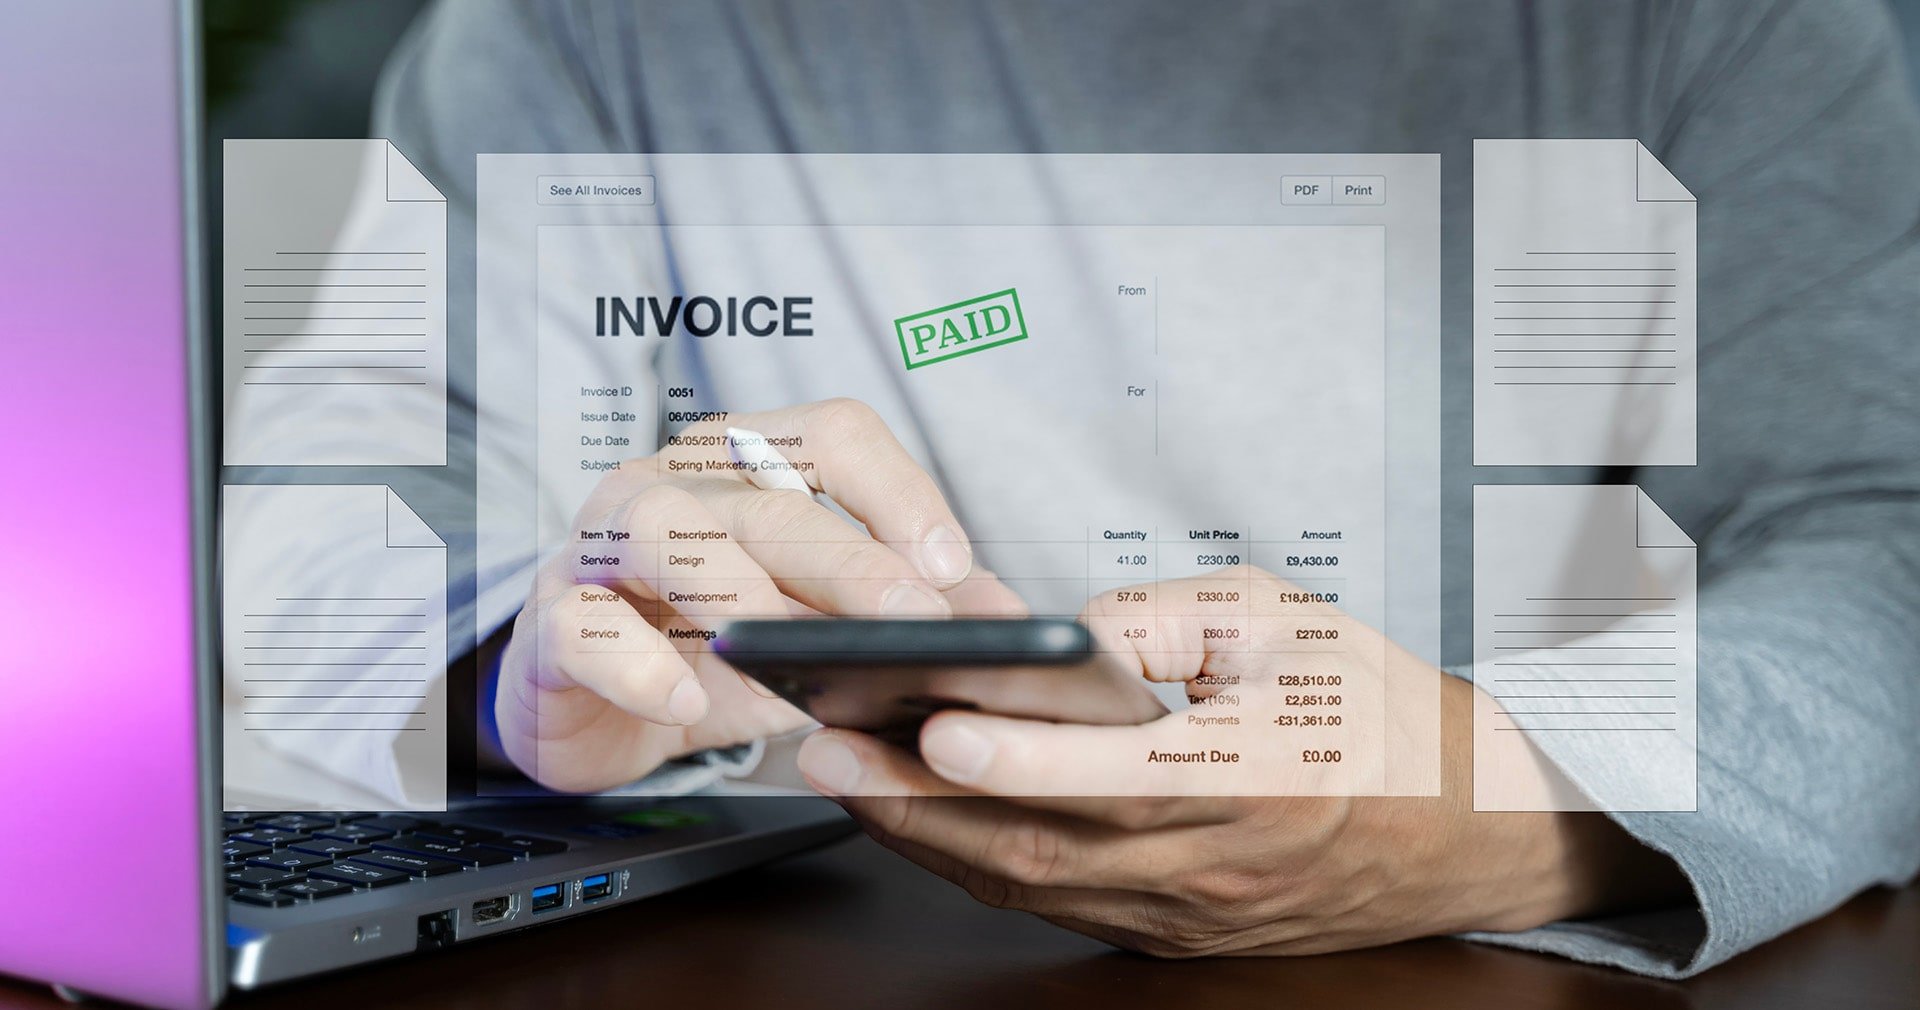 How to Create an Invoice with Partial Payment Request